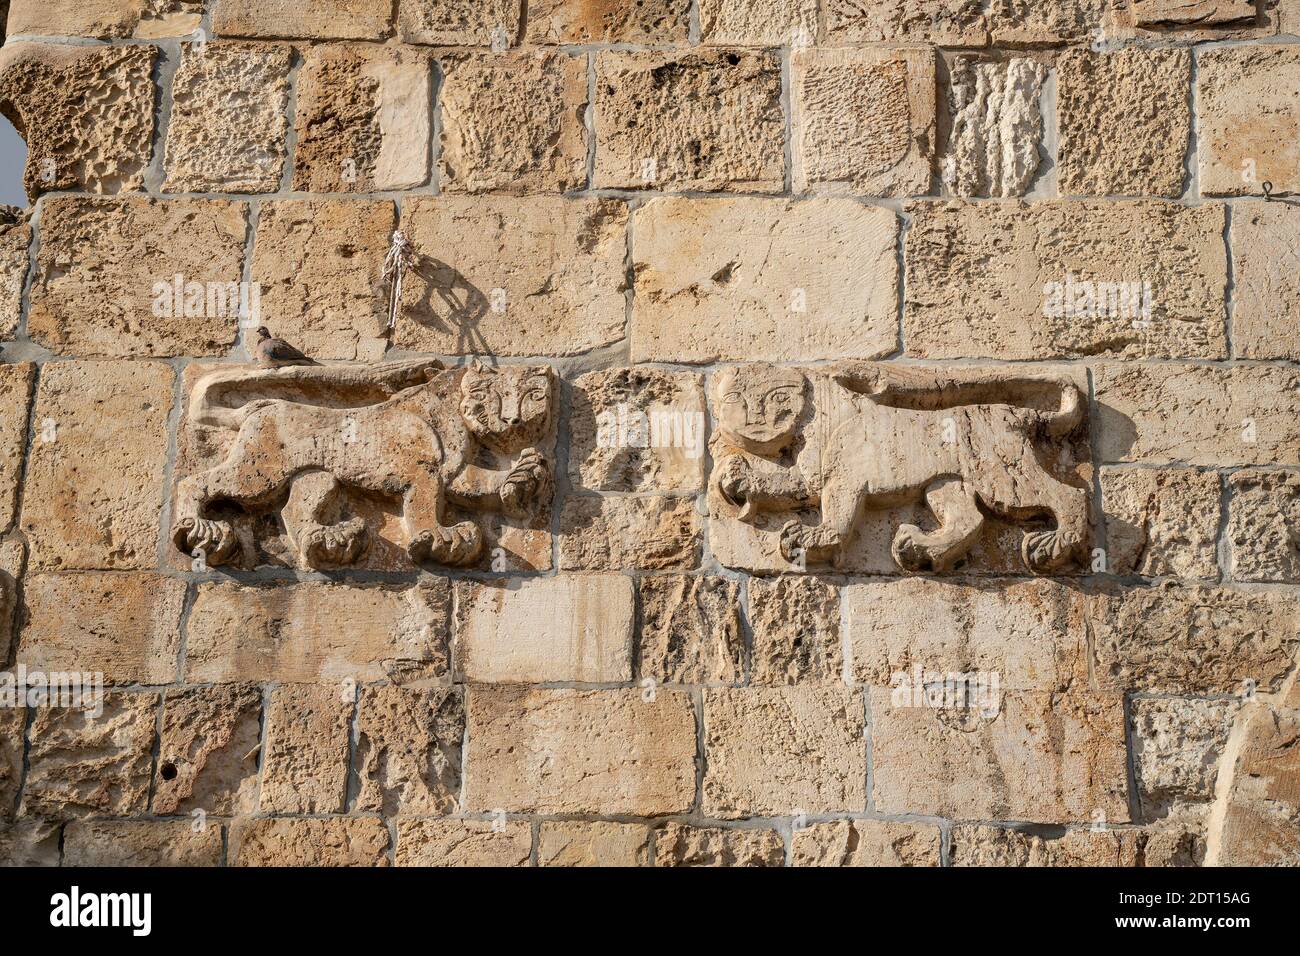 Jerusalem, Israel - December 17th, 2020: Two pairs of stone lions decorating the 'Lions gate' in the walls of ancient Jerusalem, gave it its name. Stock Photo